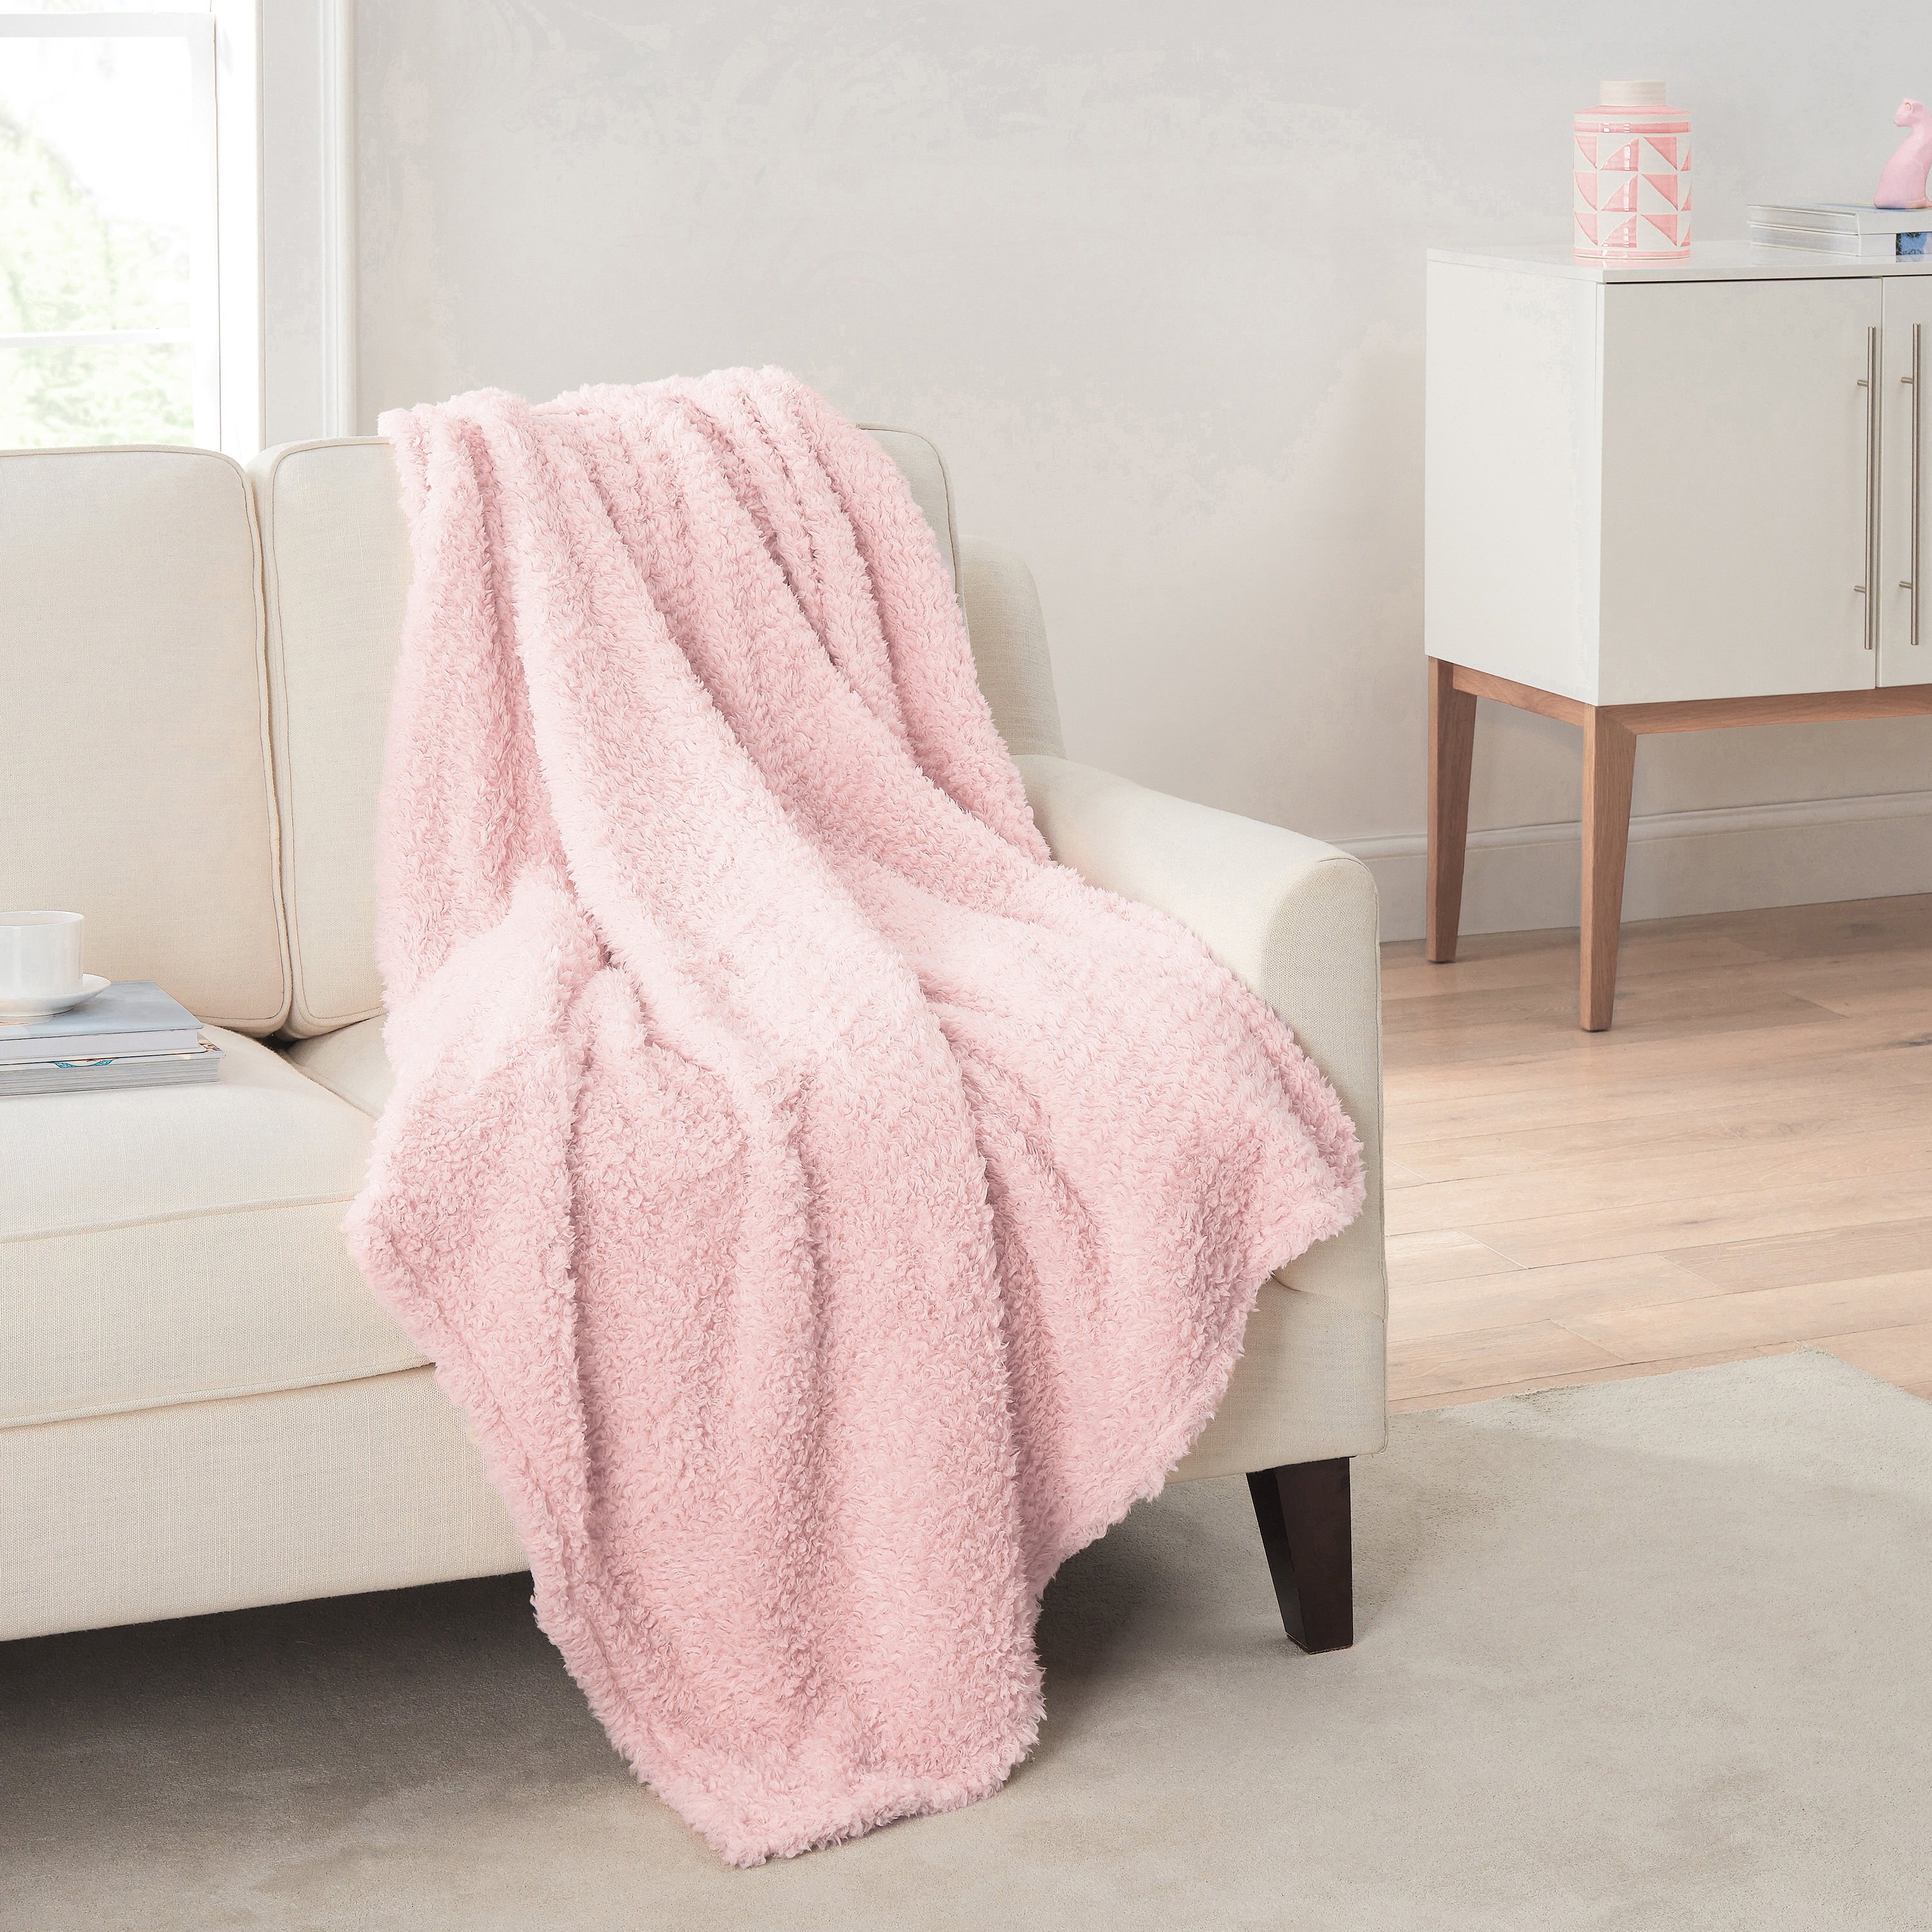 Mainstays Sherpa Throw Blanket, 50" X 60", Light Pink - image 1 of 5